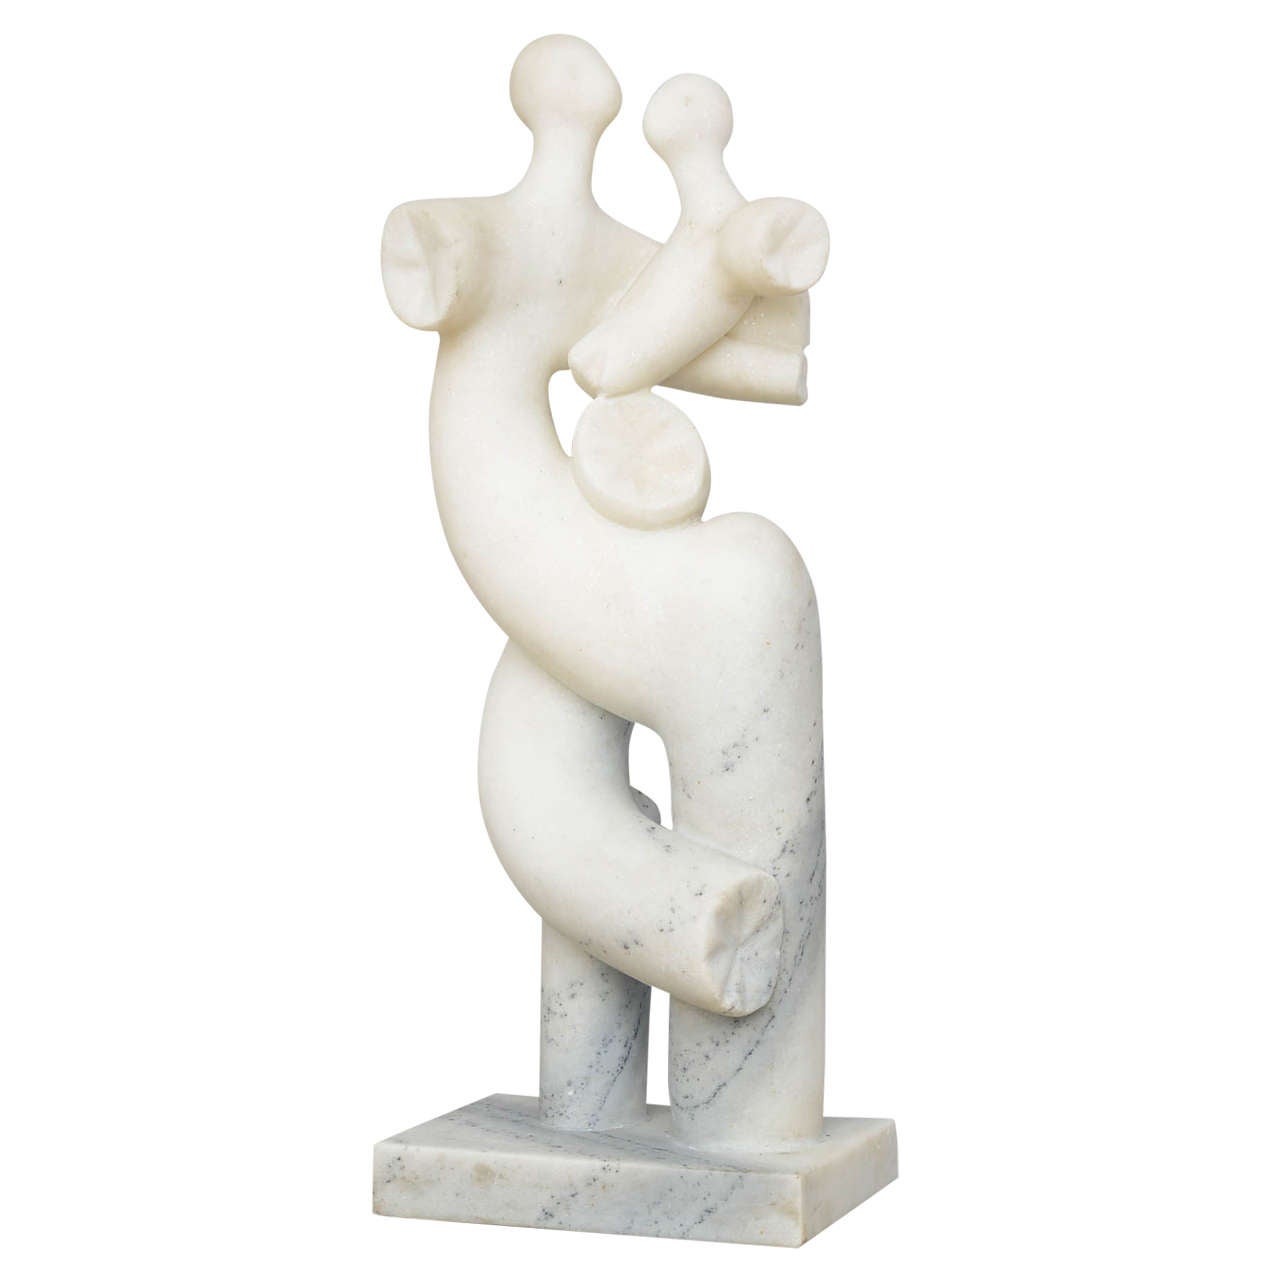 Modern Abstract Marble Sculpture, Titled "Family Embrace", Bartoli, 20th Century